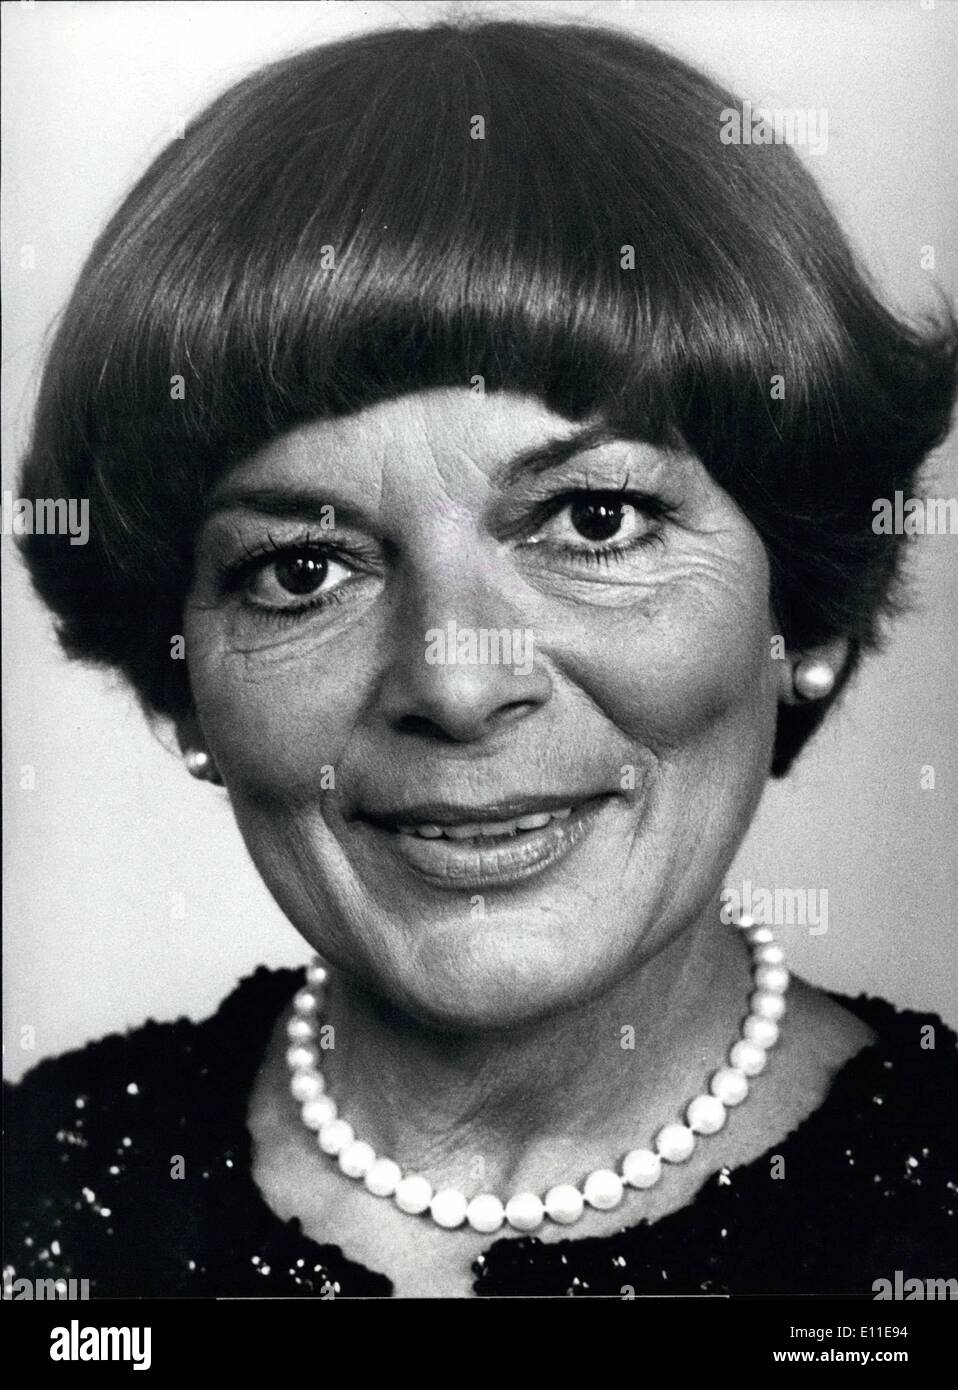 Sep. 09, 1977 - Lys Assia - for your archieves: Famous singer Lys Assia (''Oh my Daddy'') came back to Switzerland Thursday for Stock Photo